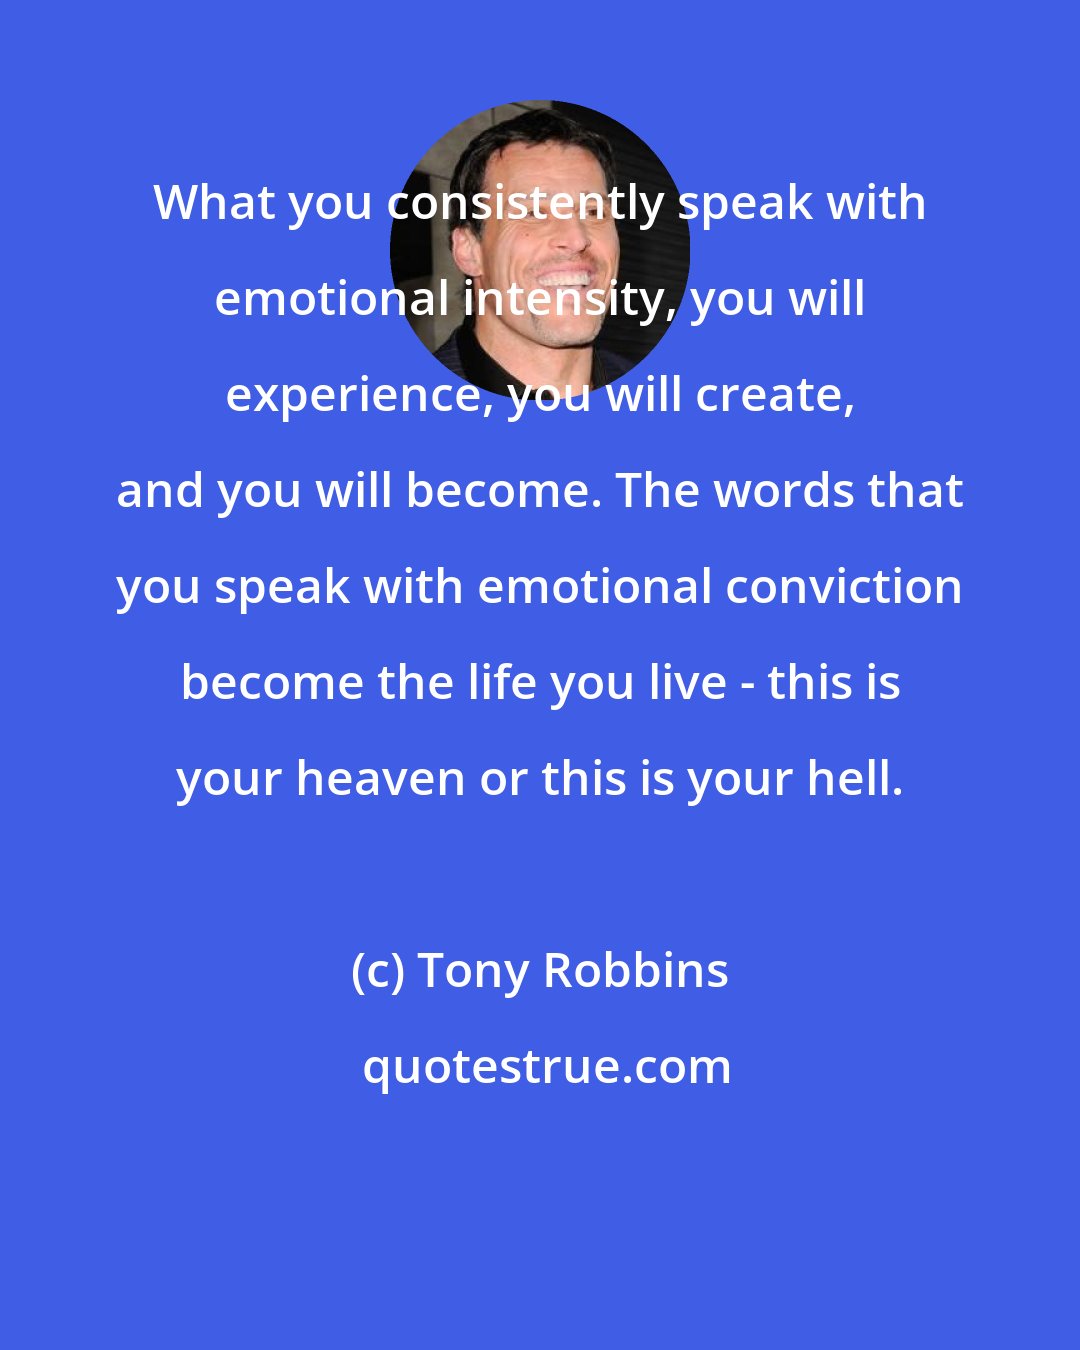 Tony Robbins: What you consistently speak with emotional intensity, you will experience, you will create, and you will become. The words that you speak with emotional conviction become the life you live - this is your heaven or this is your hell.